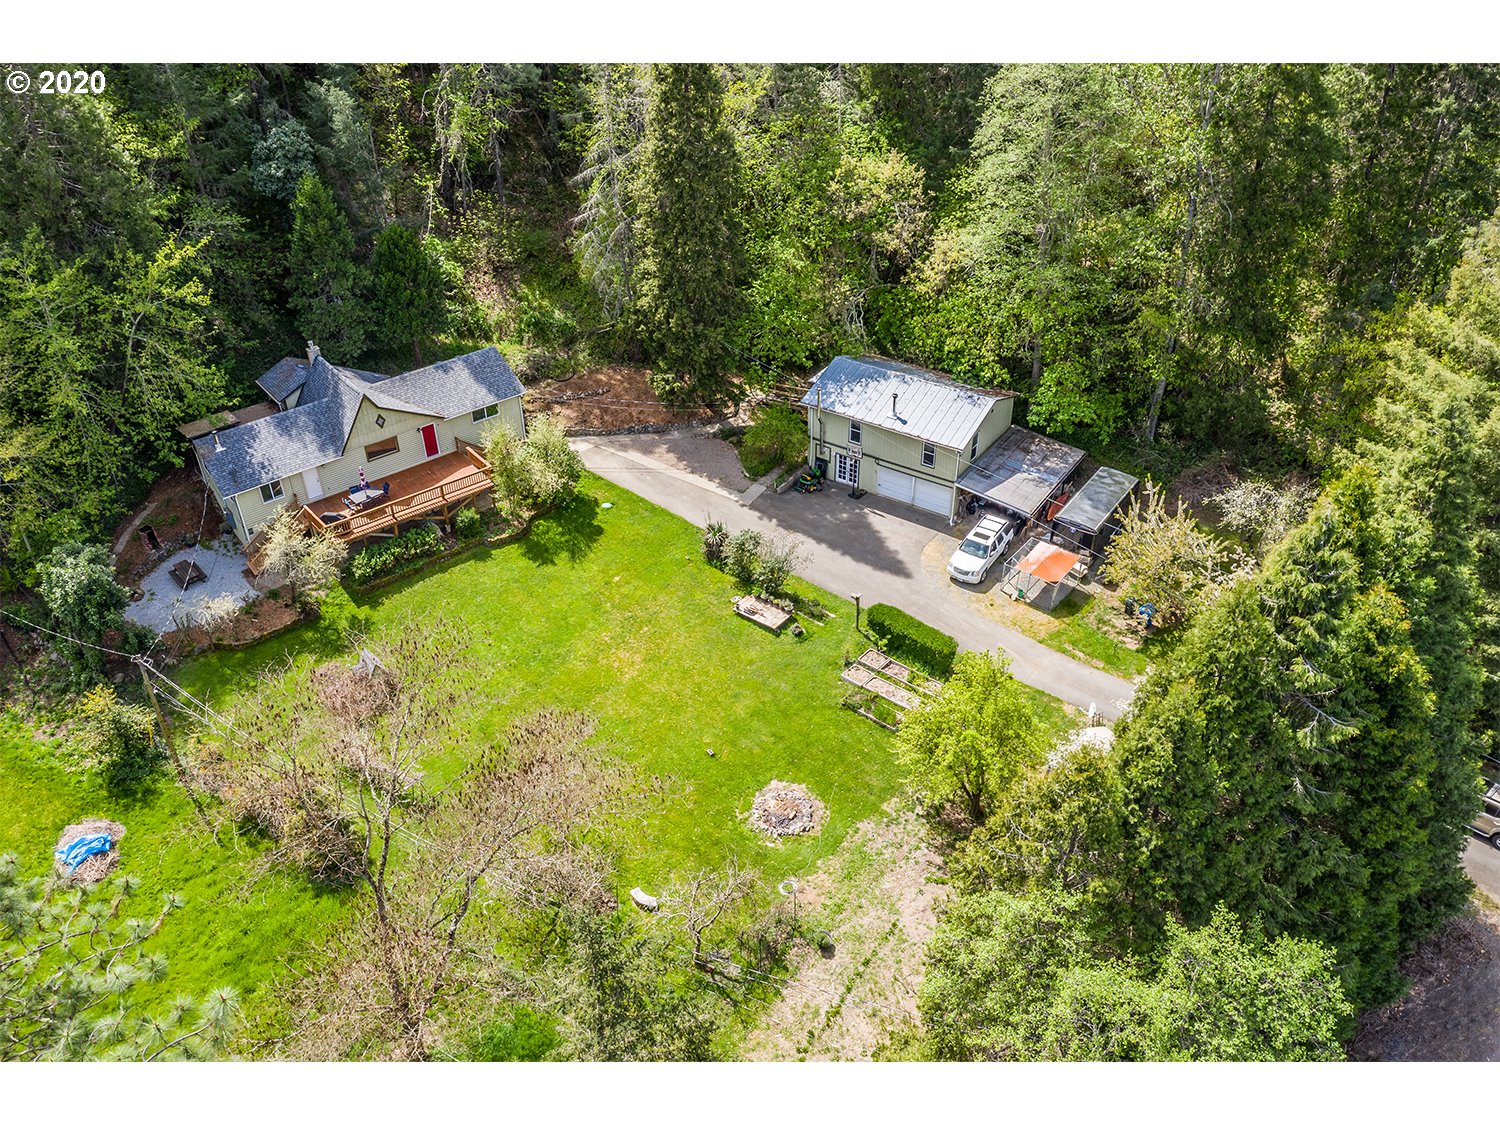 5975 ROGUE RIVER HWY (1 of 1)